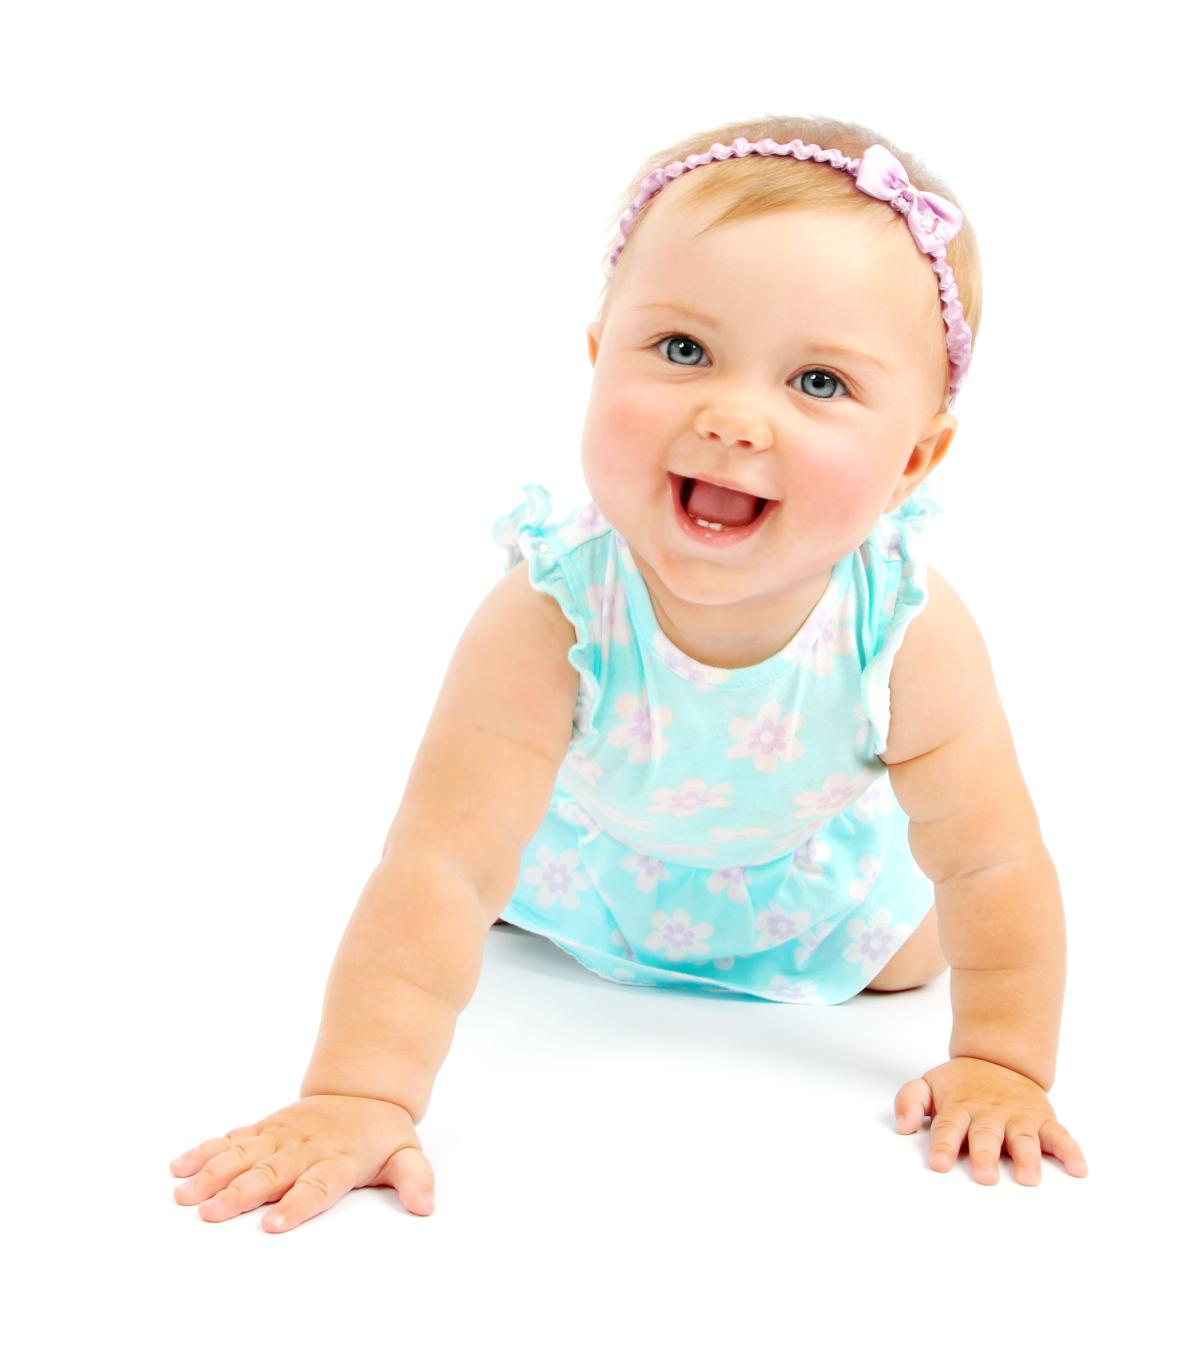 Image of baby smiling